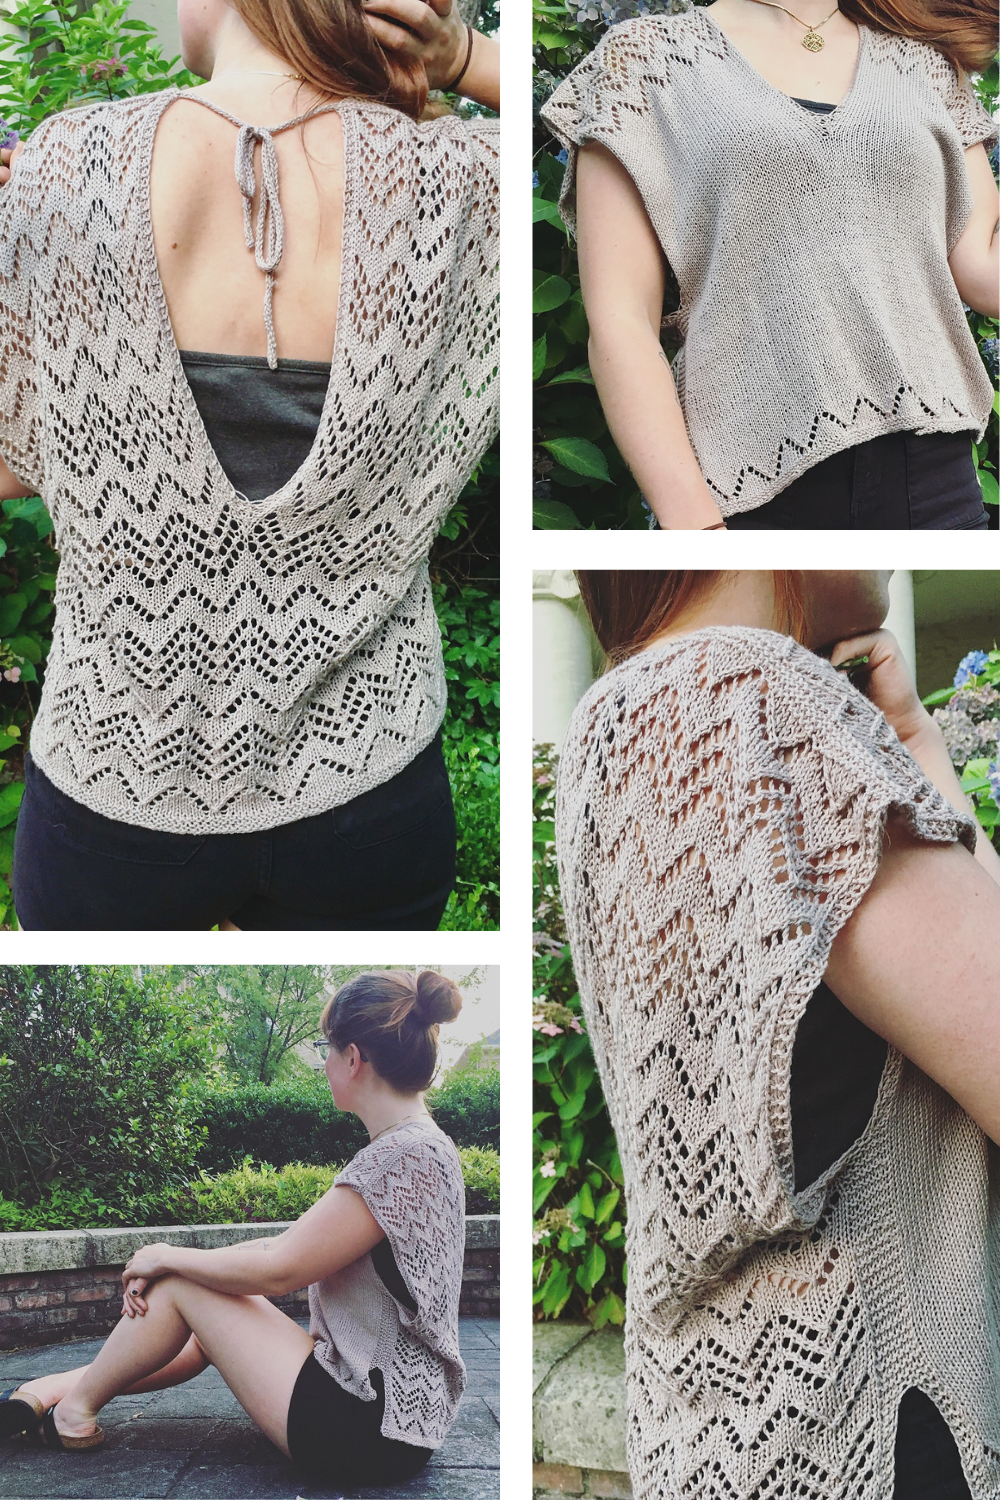 A quad of photos show different views of a gray knit top with a full lace, scooped neck back and front with lace details around shoulders and hem